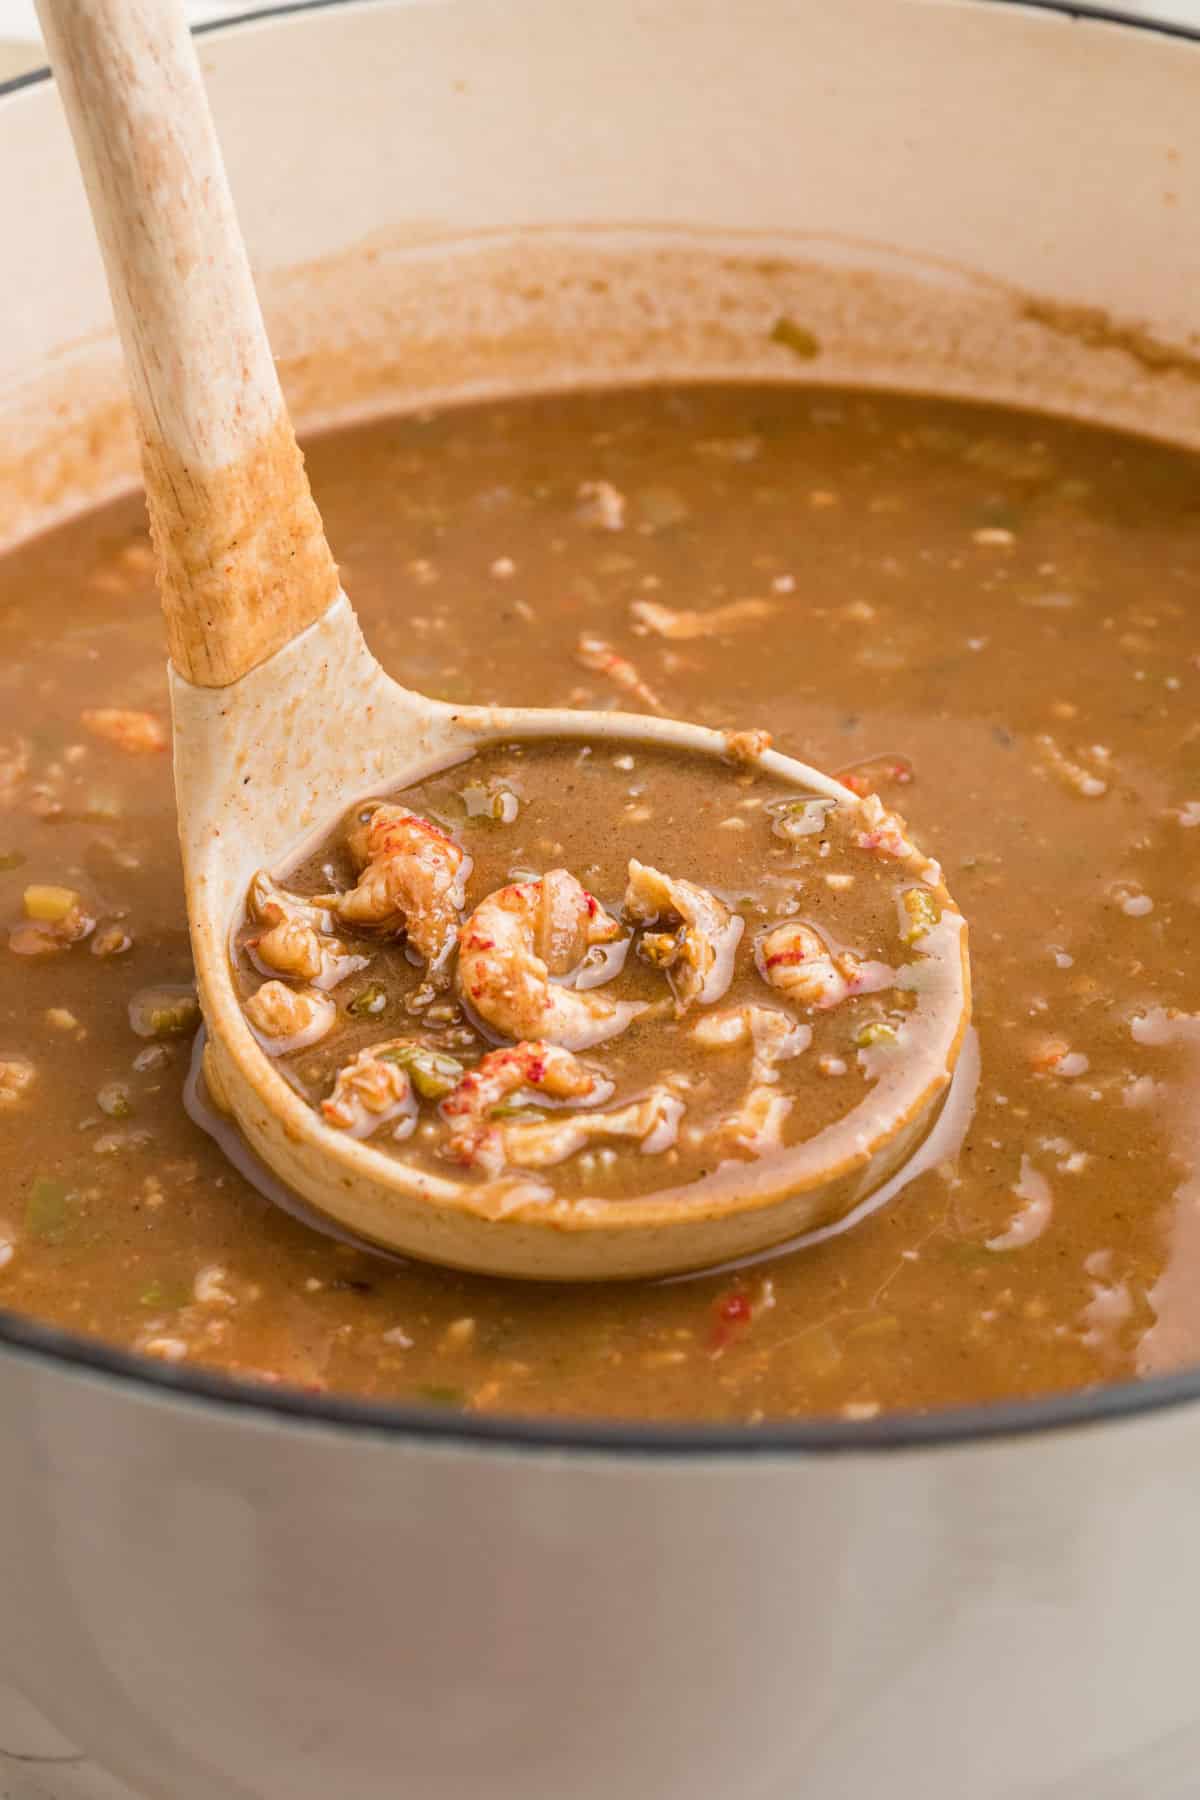 A pot full of crawfish stew with a ladle scooping some out.